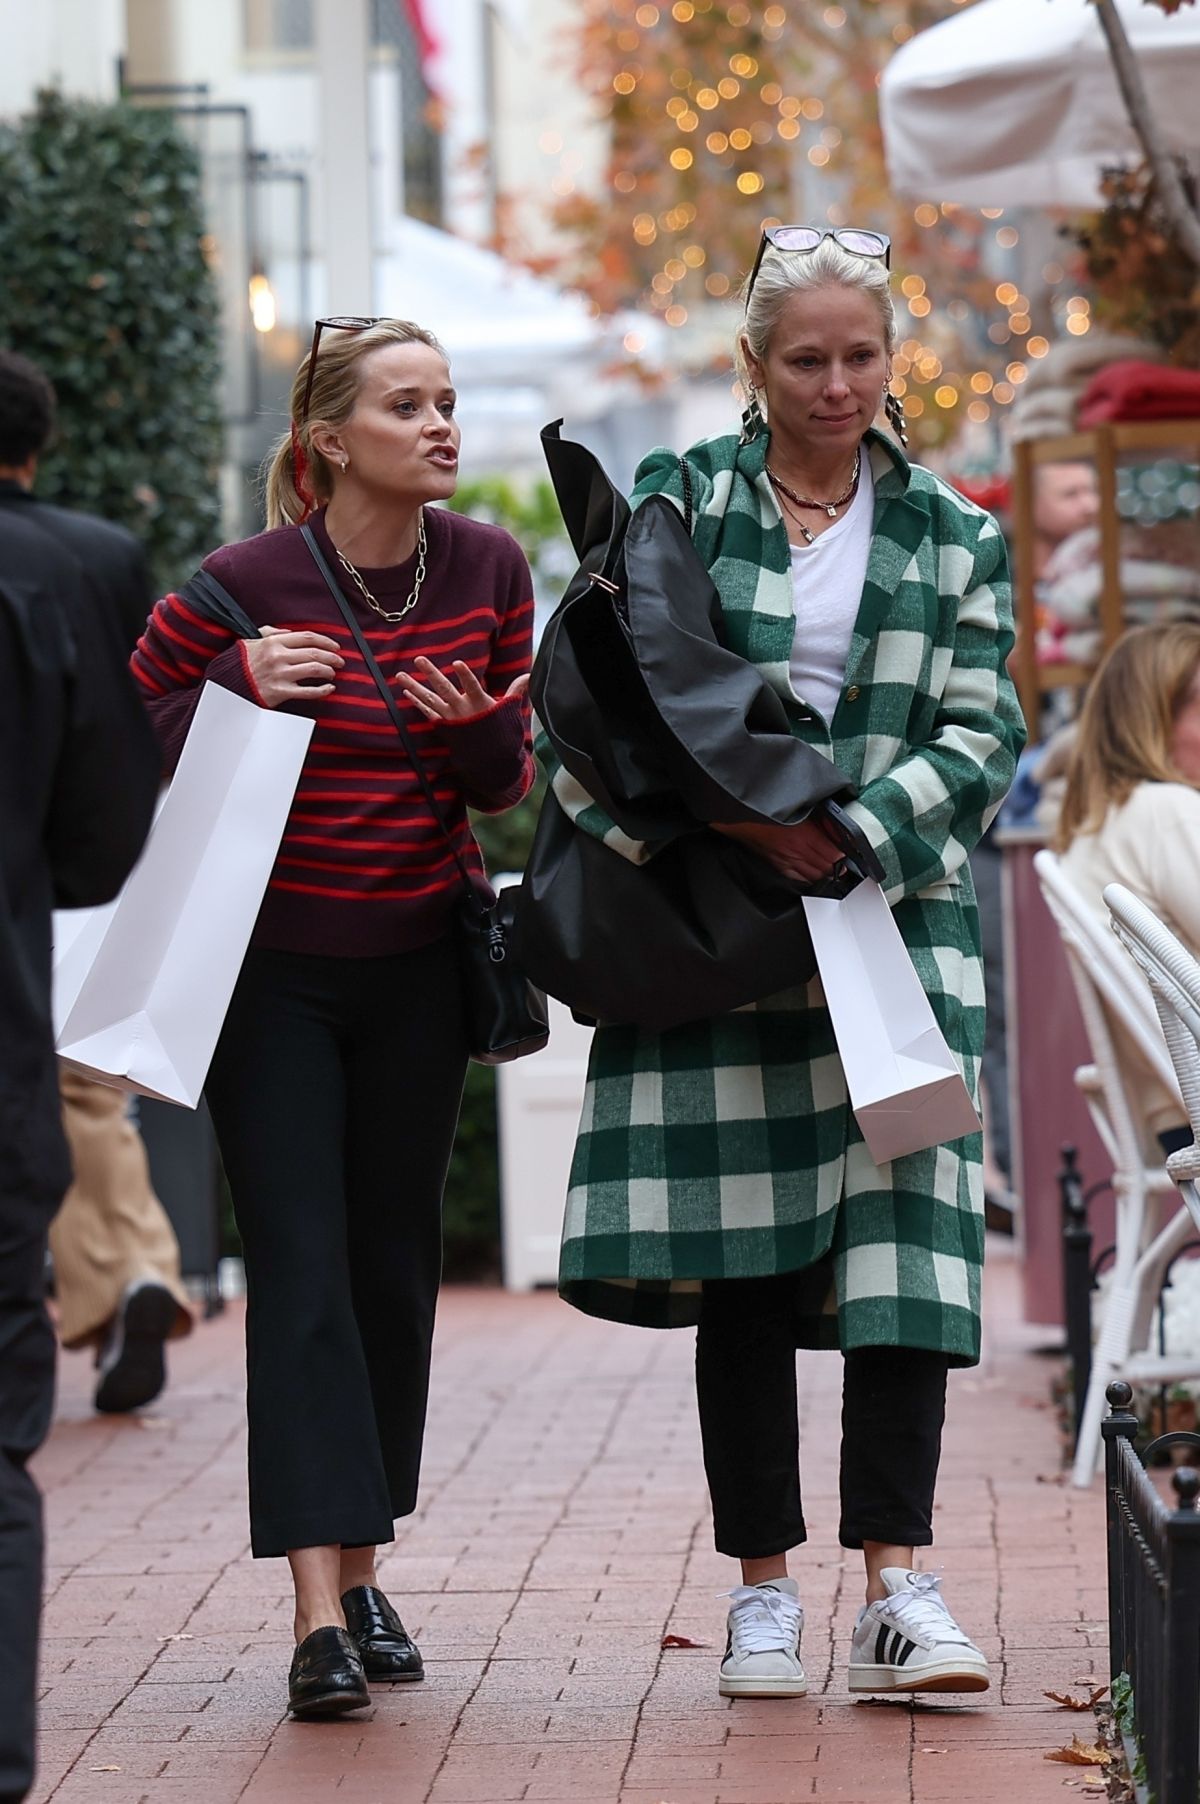 Reese Witherspoon in Pacific Palisades Mall Outing 2